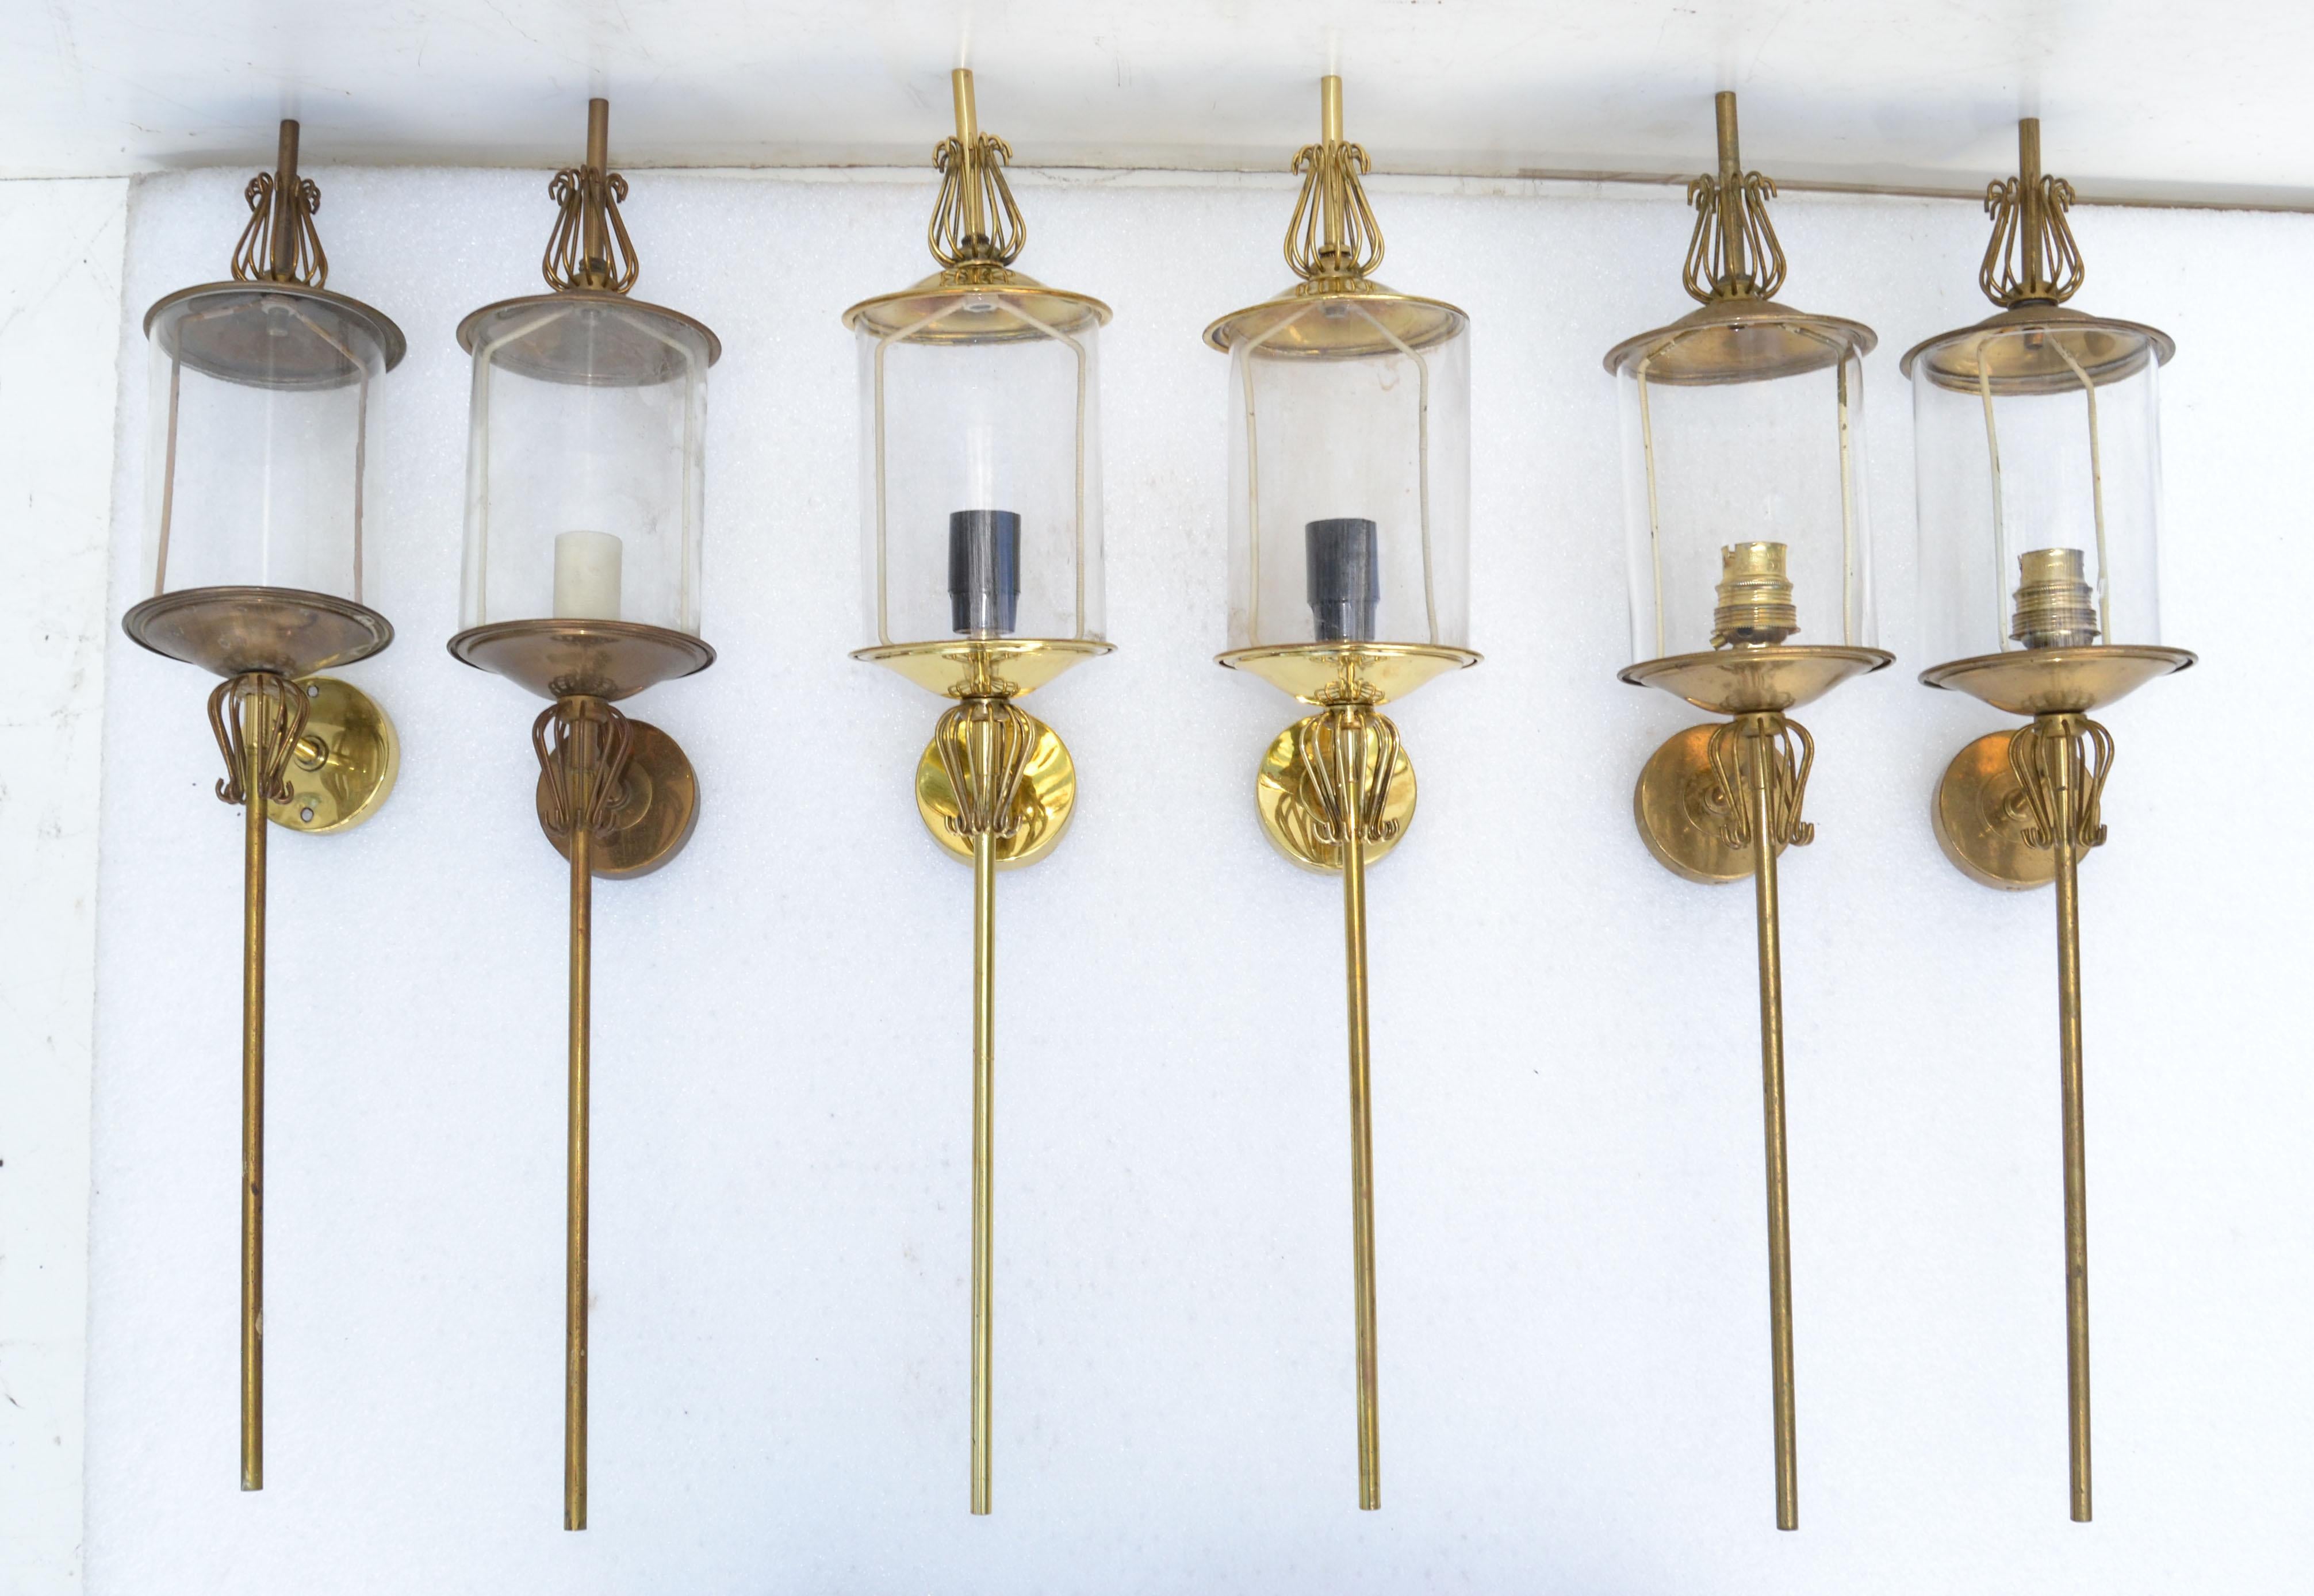 Pair of Maison Lunel Brass & Glass Sconces, Wall Lamp French Mid-Century Modern For Sale 2